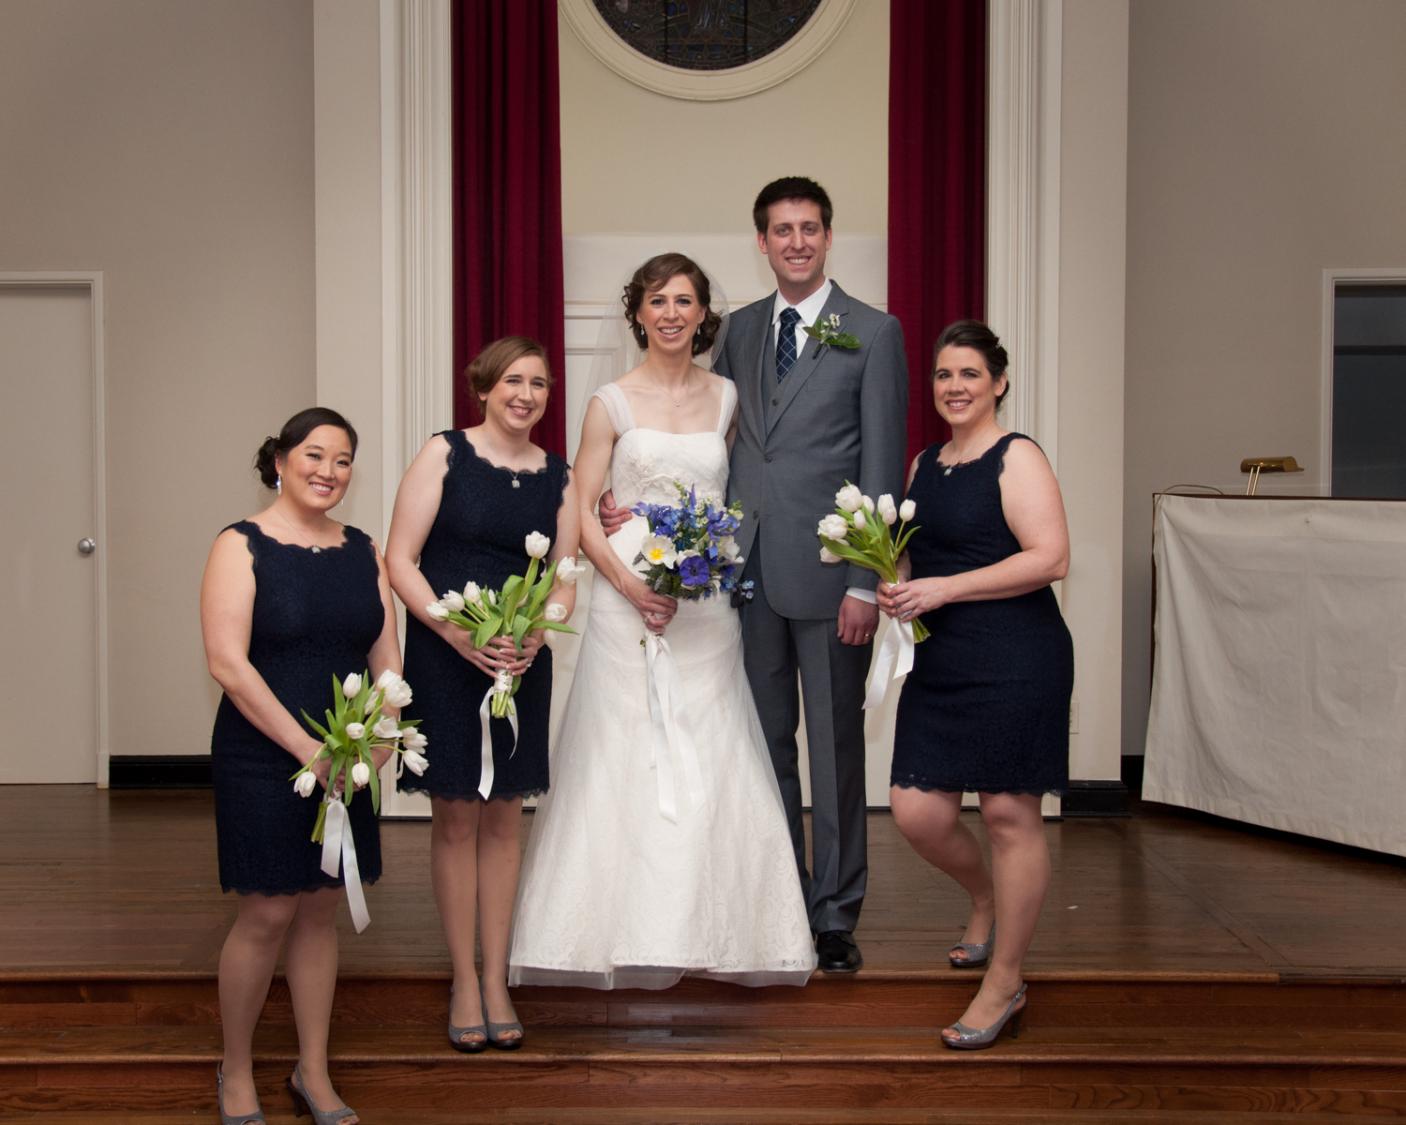 Photos by Catherine Siler and http://www.stephanieeileenphotography.com